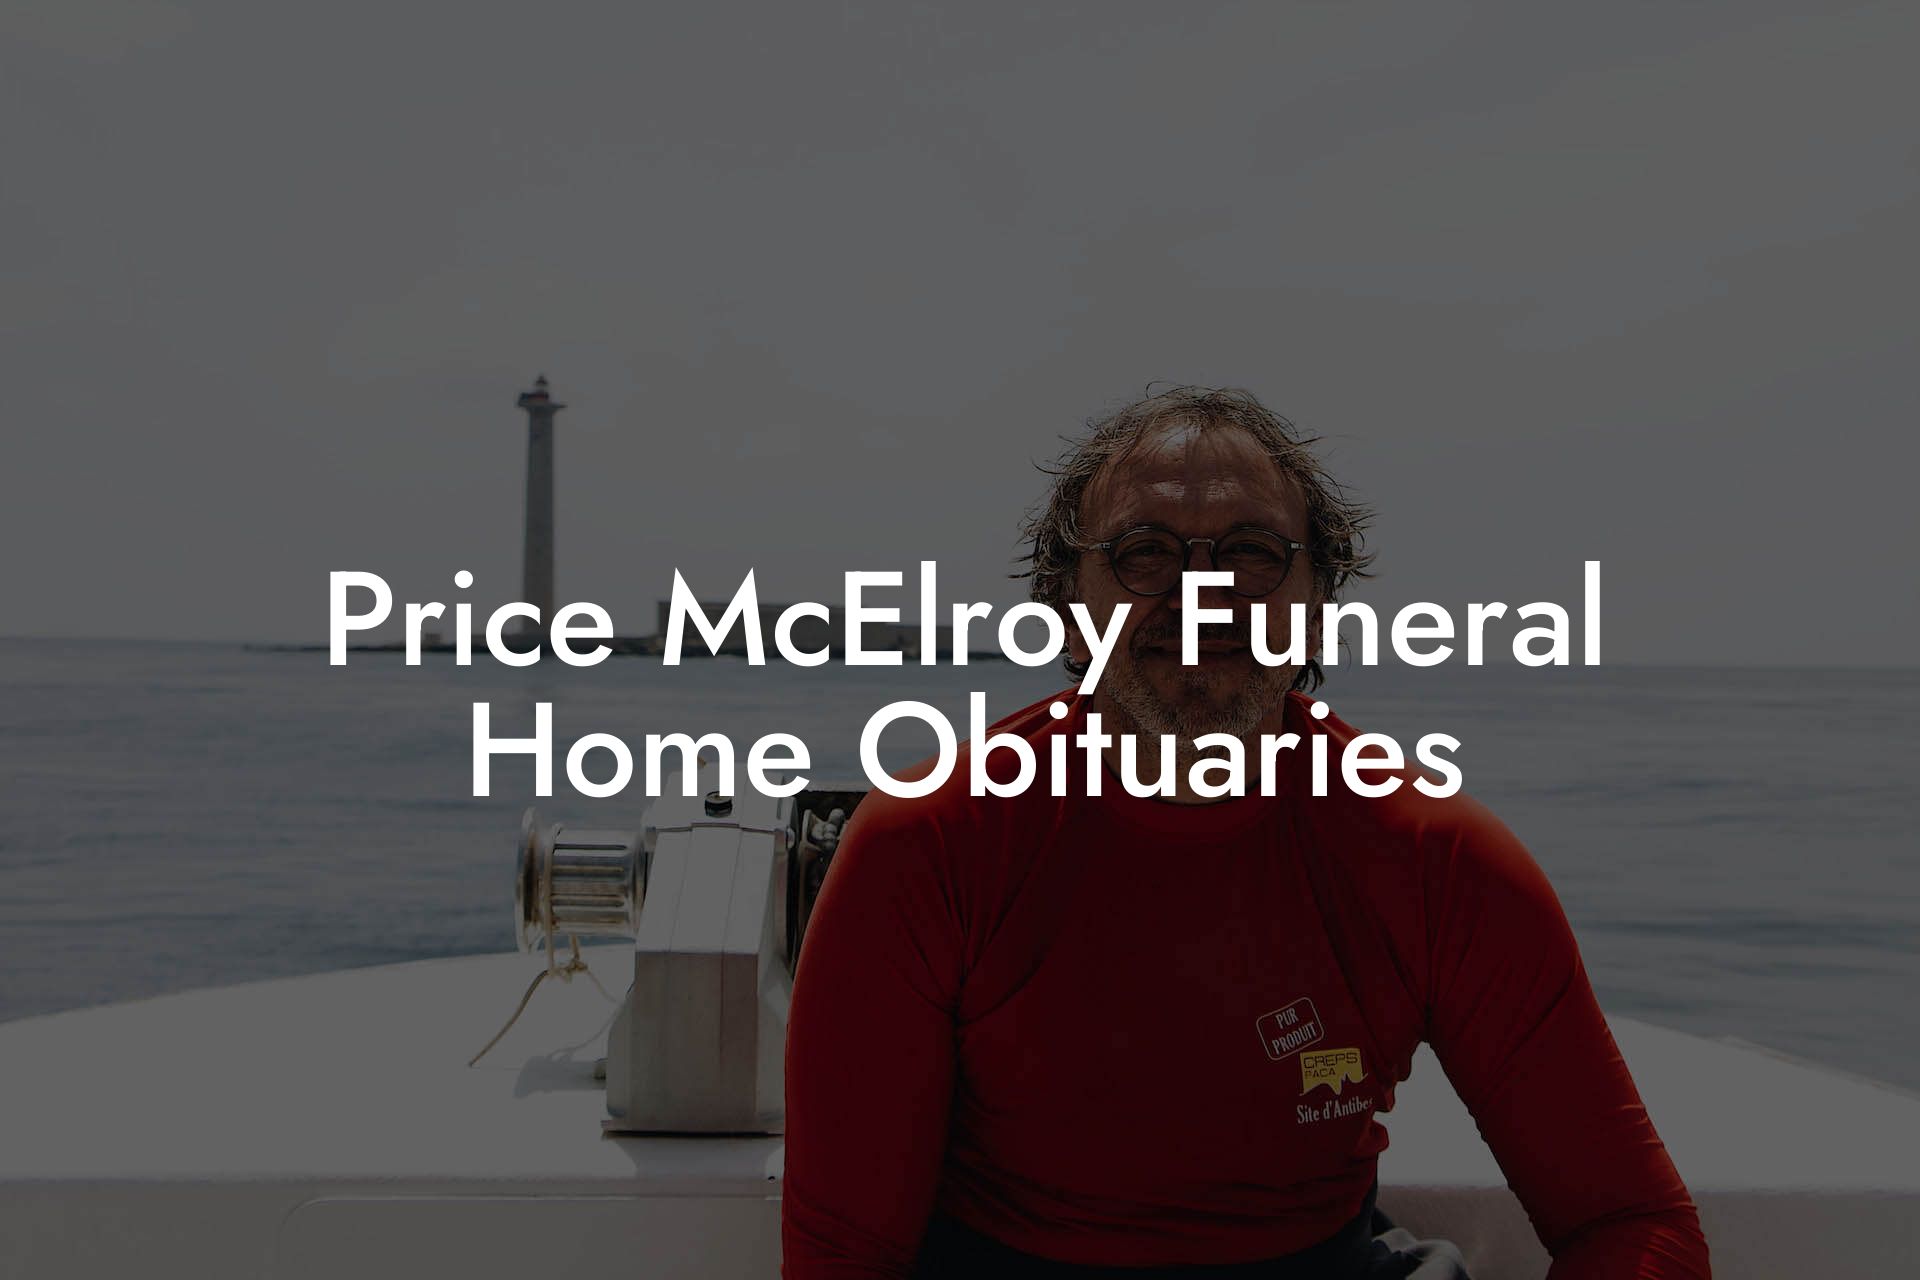 Price McElroy Funeral Home Obituaries